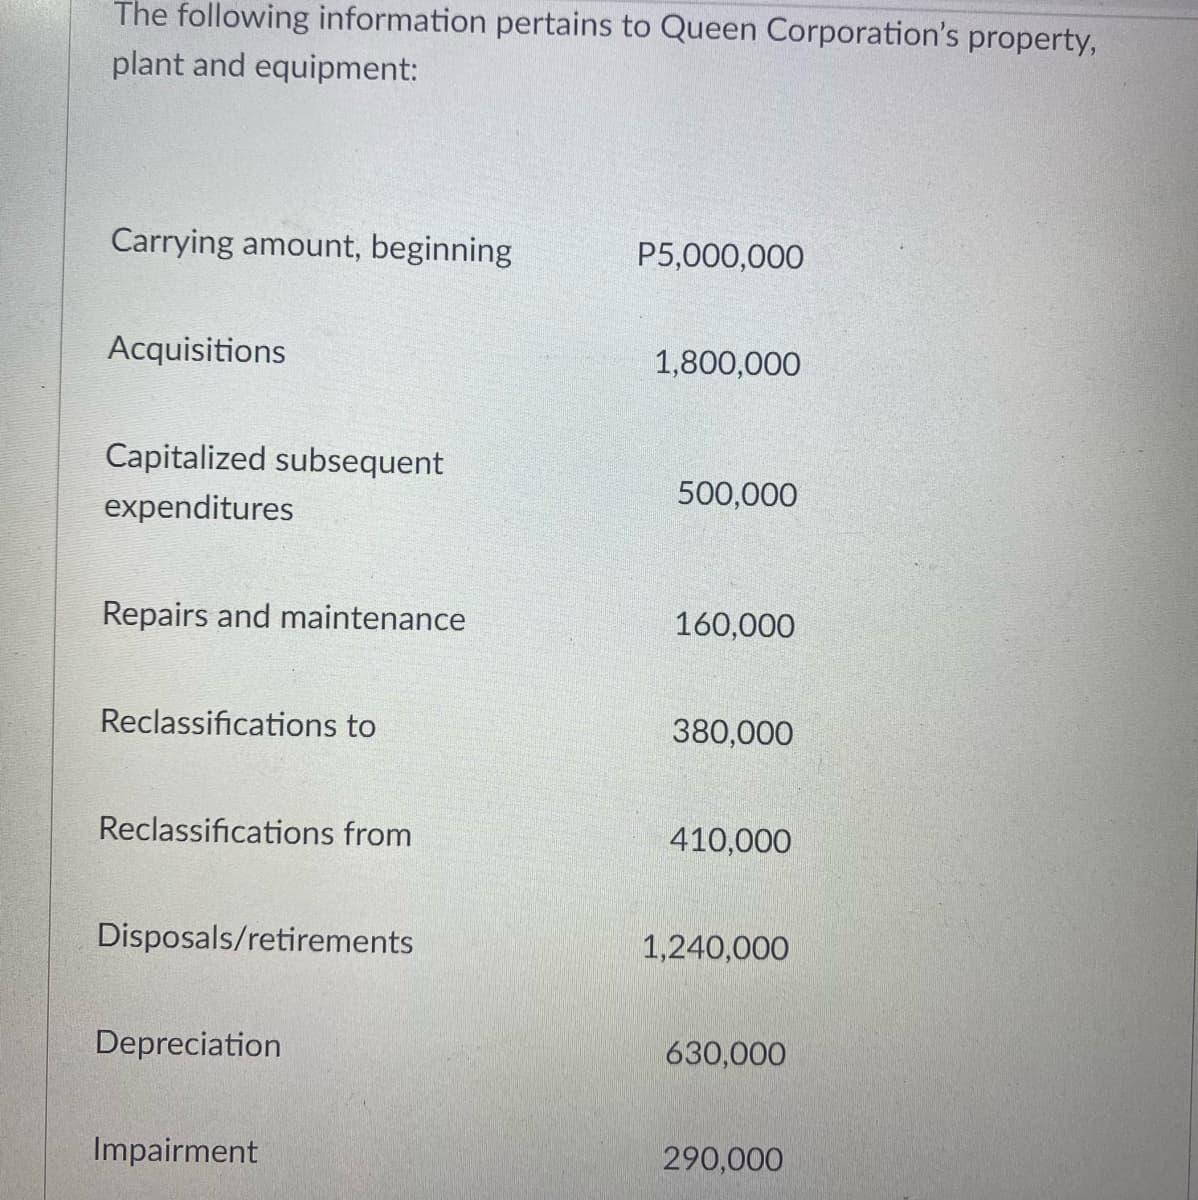 The following information pertains to Queen Corporation's property,
plant and equipment:
Carrying amount, beginning
P5,000,000
Acquisitions
1,800,000
Capitalized subsequent
expenditures
500,000
Repairs and maintenance
160,000
Reclassifications to
380,000
Reclassifications from
410,000
Disposals/retirements
1,240,000
Depreciation
630,000
Impairment
290,000
